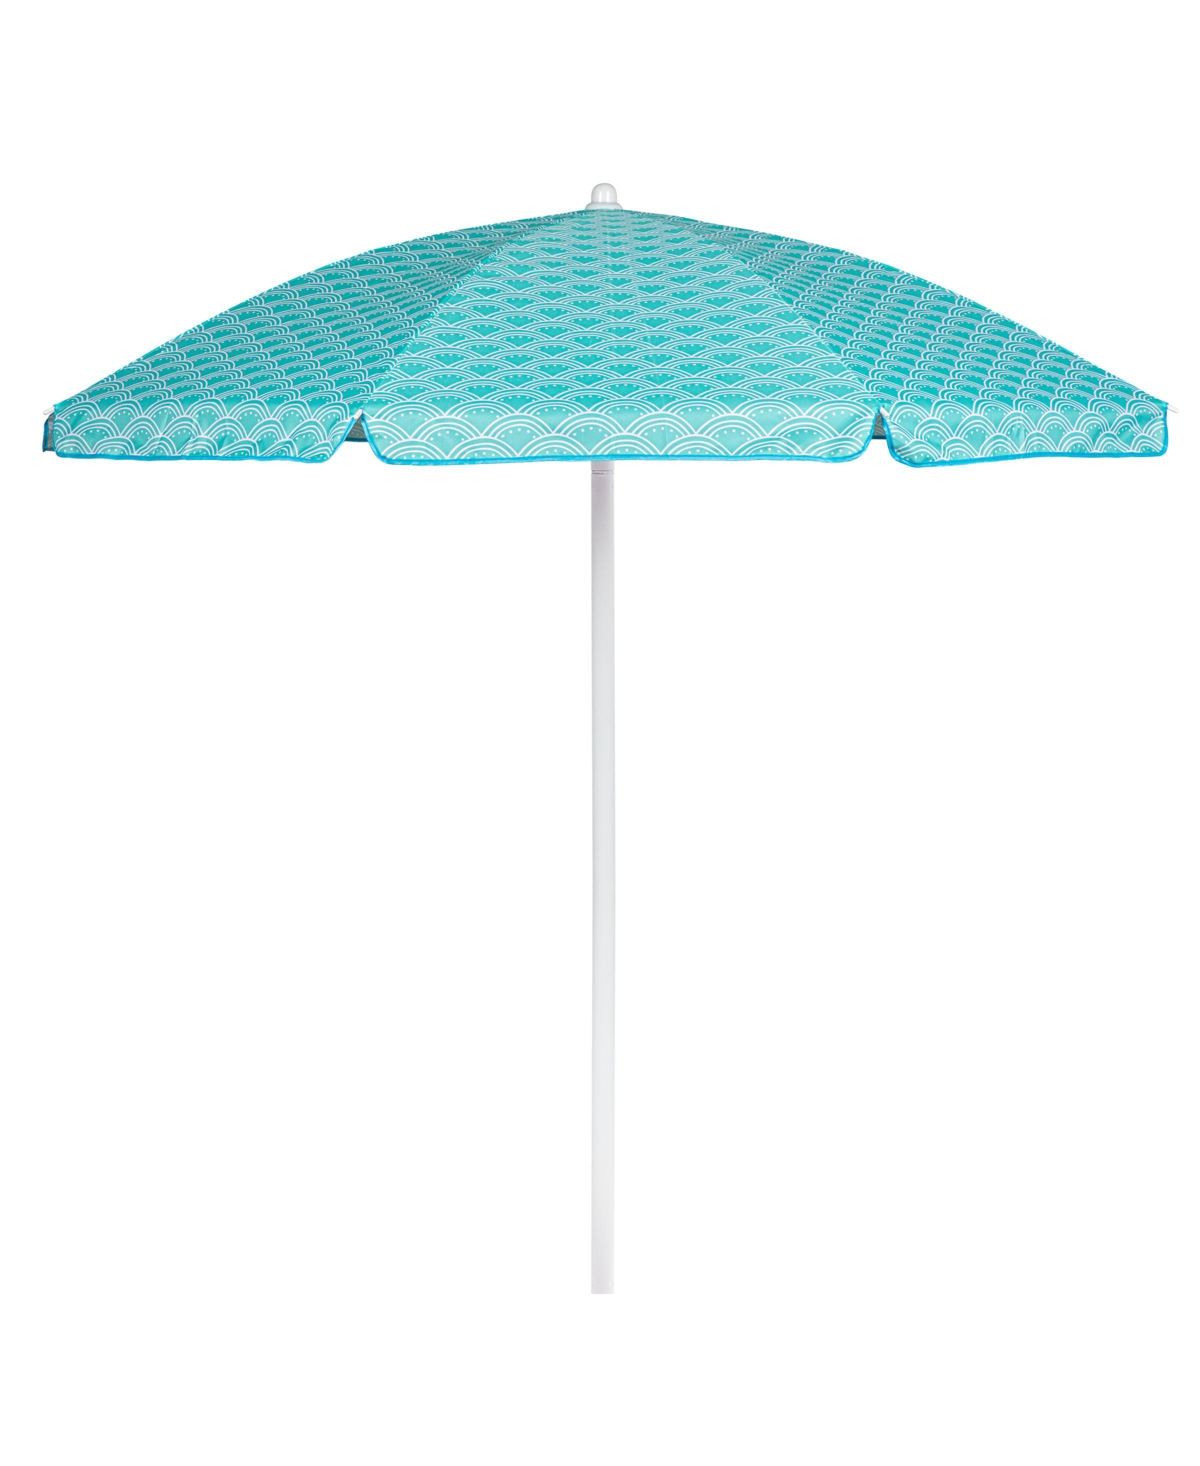 by Picnic Time 5.5 Ft. Portable Beach Umbrella - Mermaid Teal